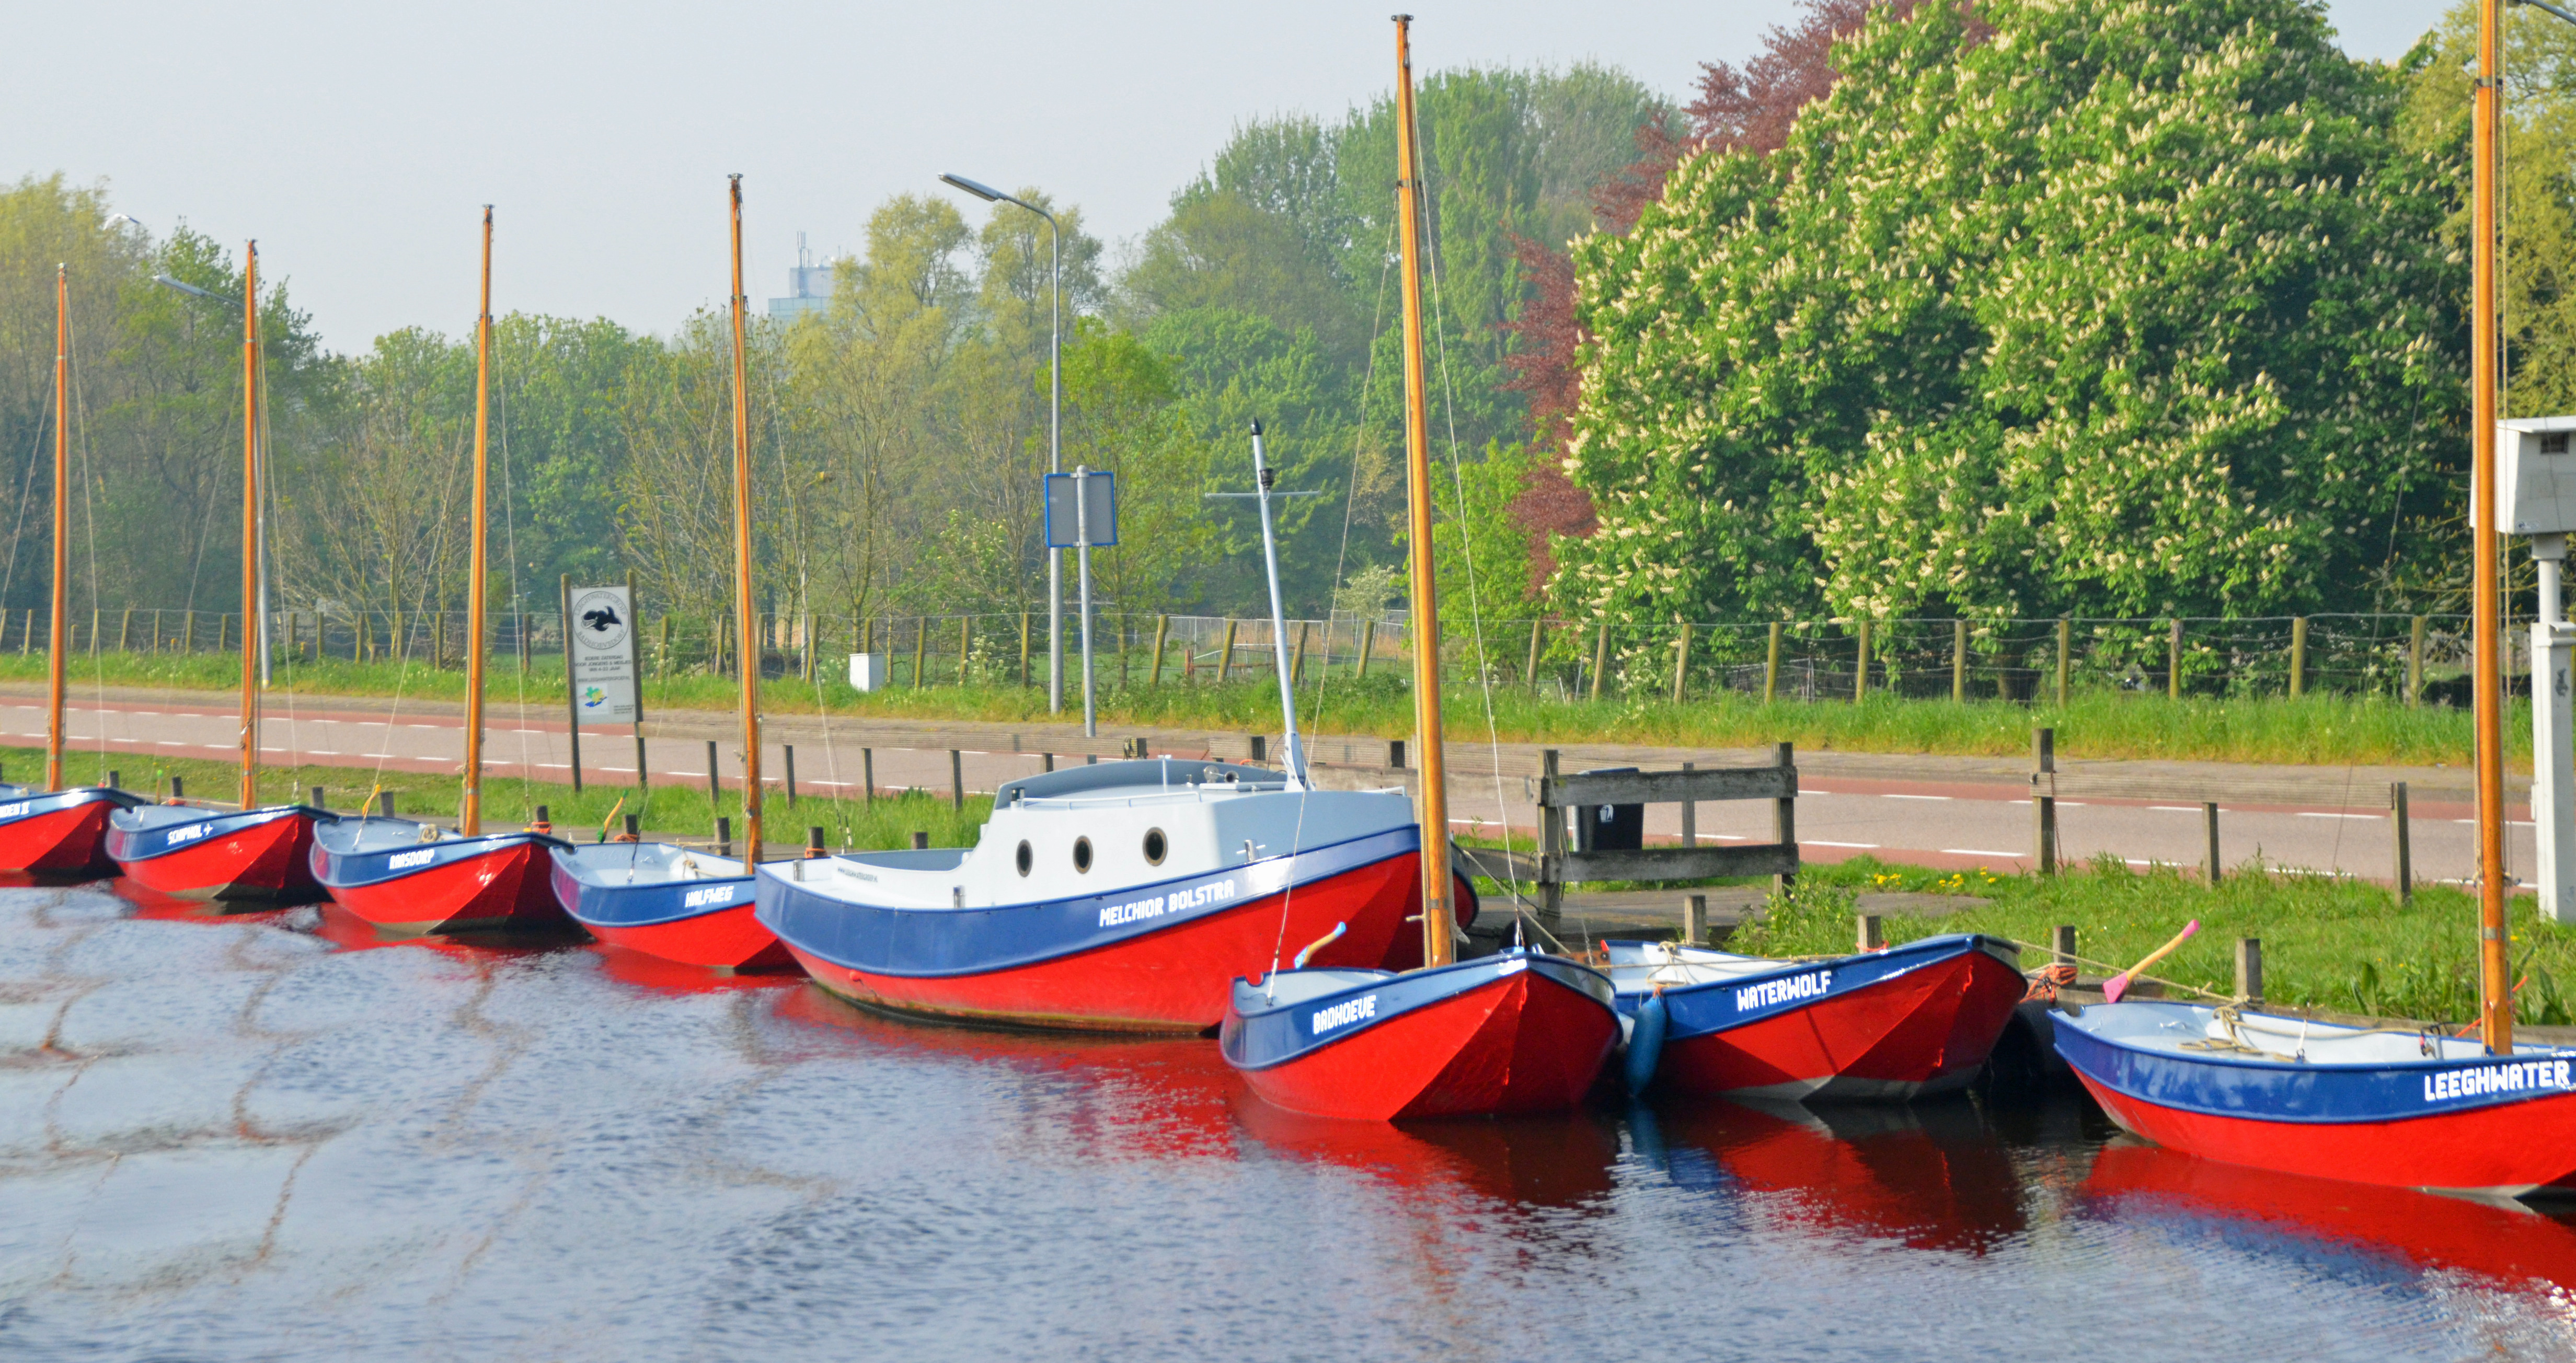 boats on Schipol canal